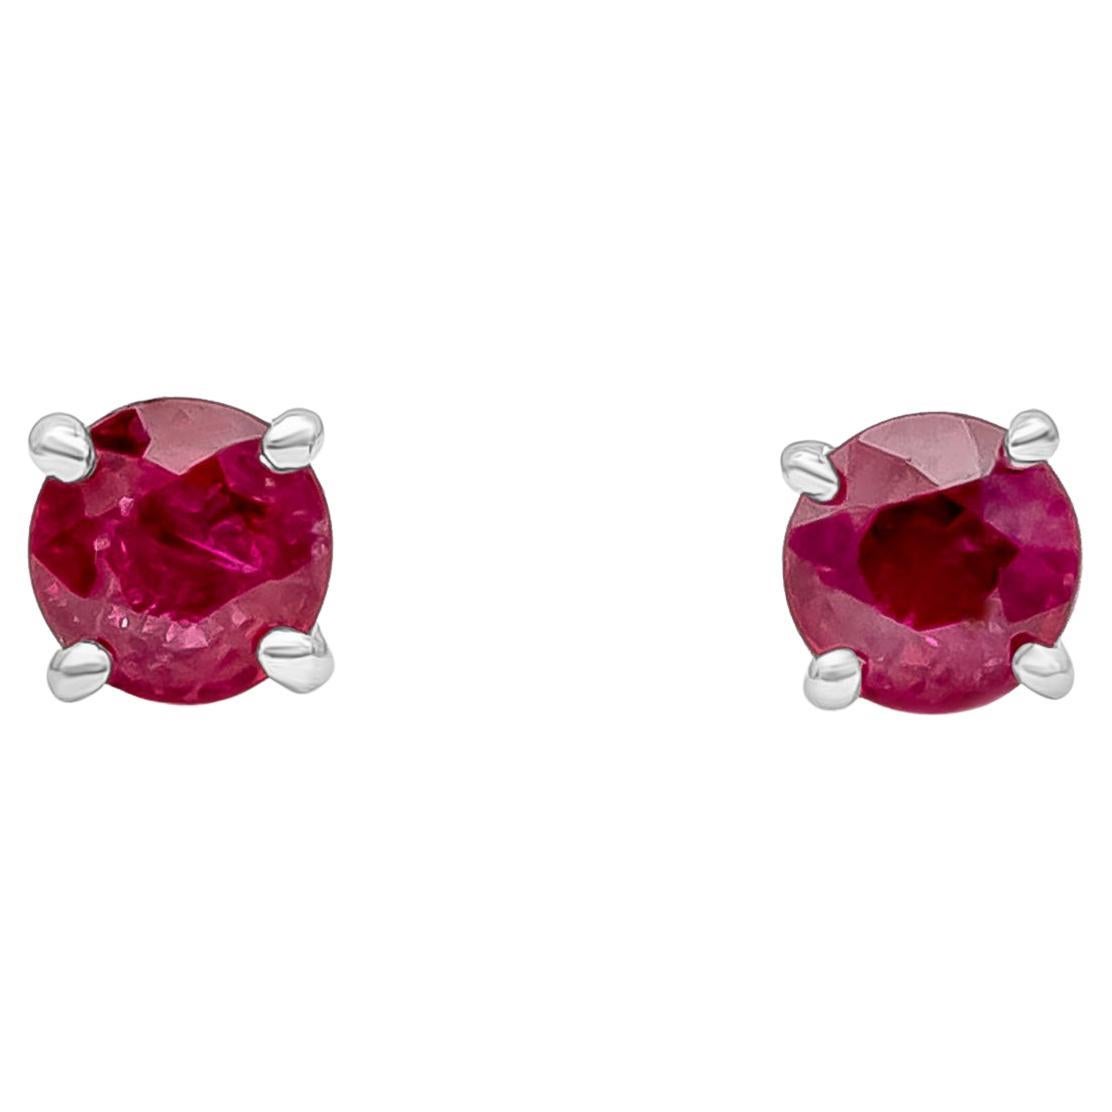 A classic pair of stud earrings showcasing vibrant red round cut rubies weighing 1.12 carats total. Mounted in a timeless four-prong design setting, Made with 18K White Gold.

Roman Malakov is a custom house, specializing in creating anything you